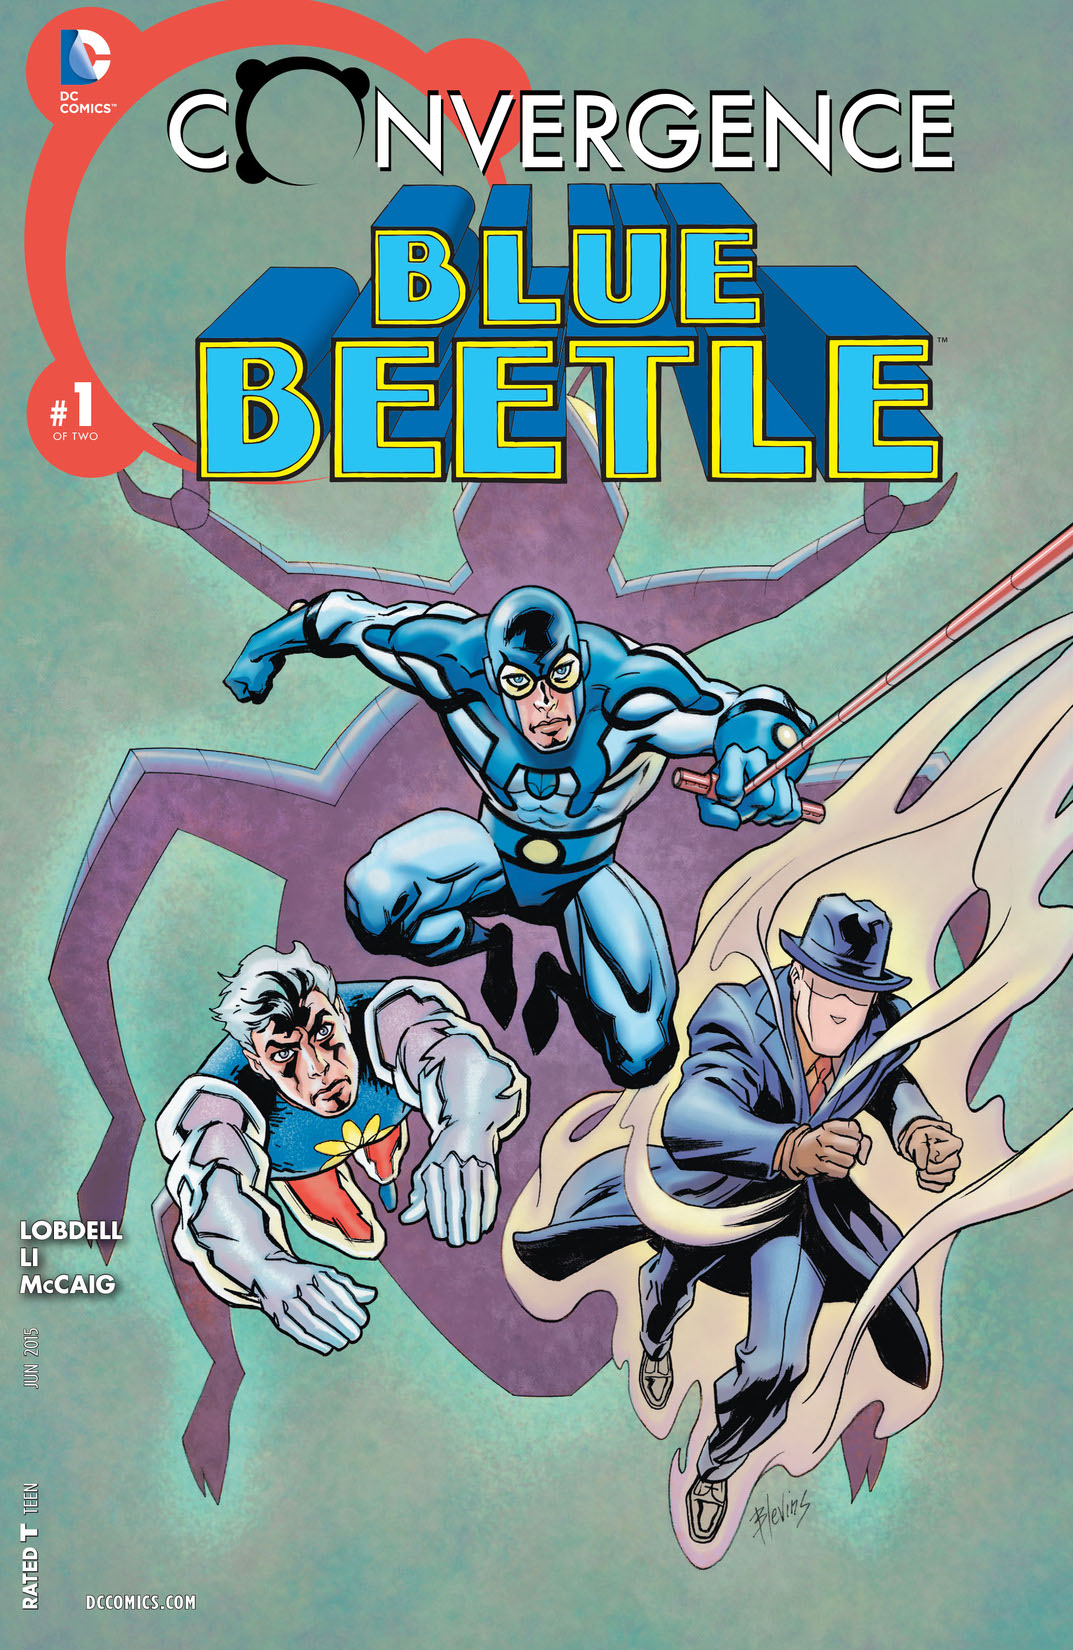 Convergence: Blue Beetle #1 preview images